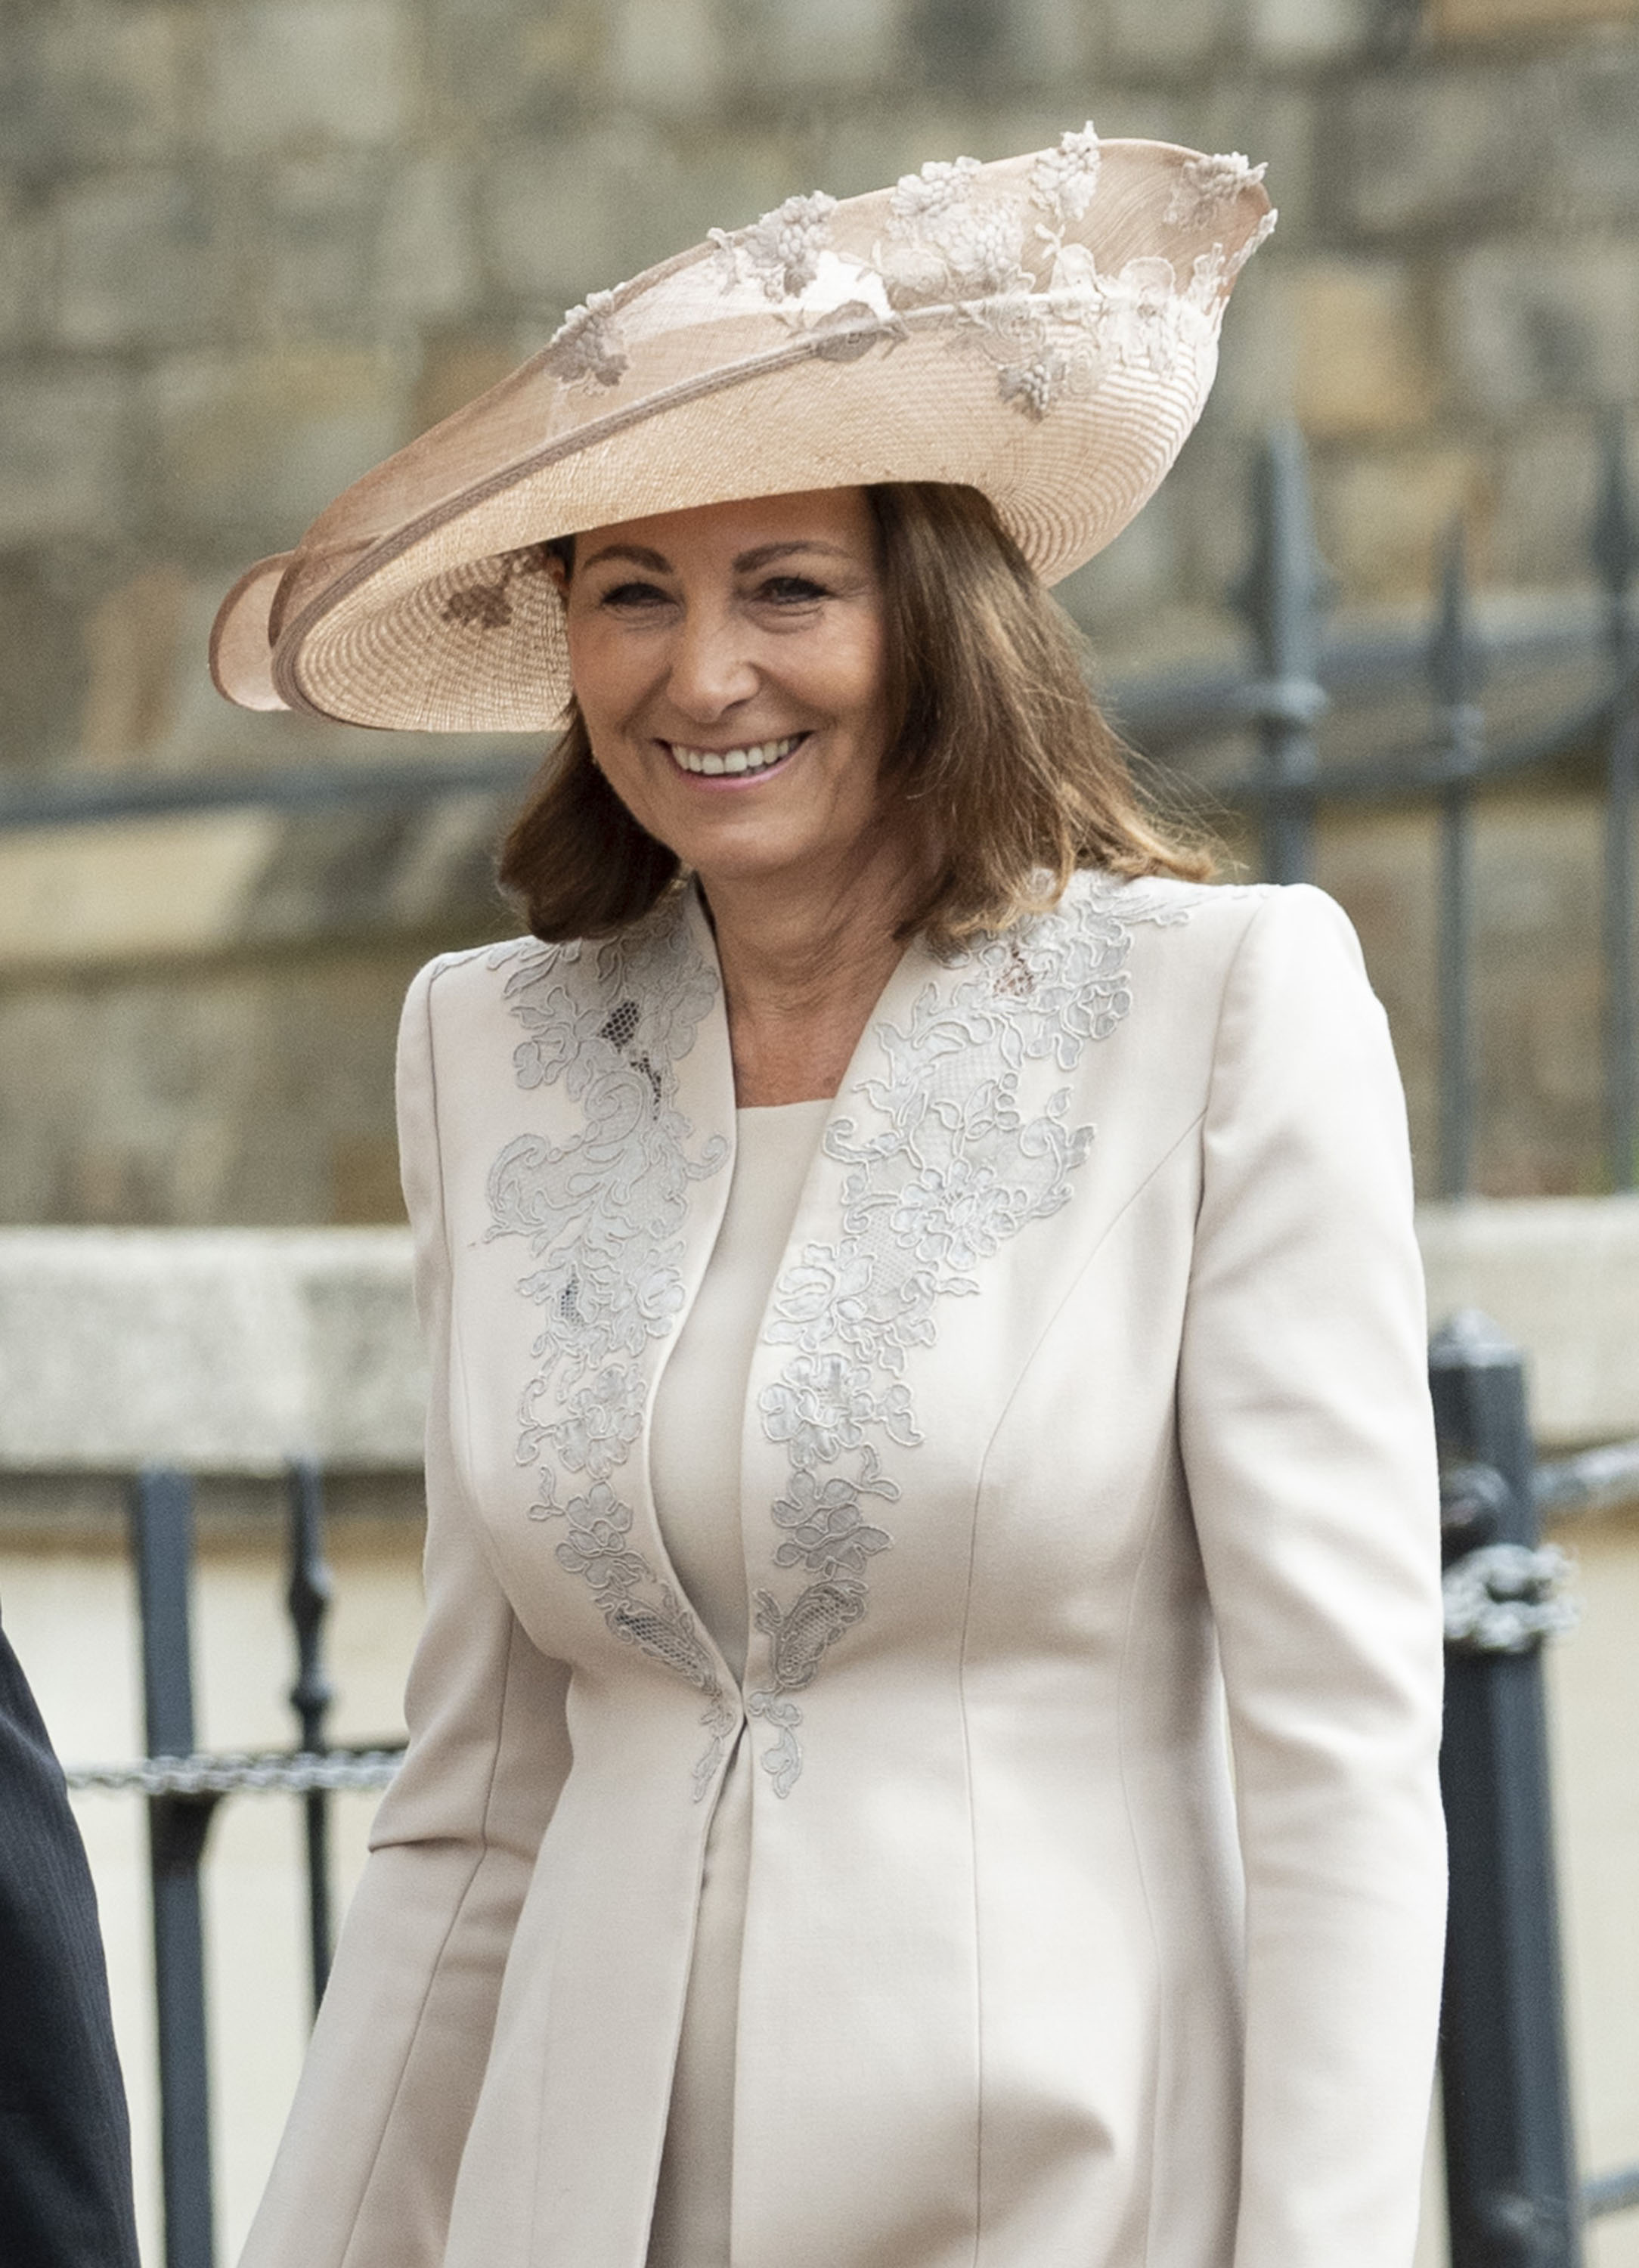 Carole Middleton attends the wedding of Lady Gabriella Windsor and Mr Thomas Kingston in Windsor, England, on May 18, 2019. | Source: Getty Images